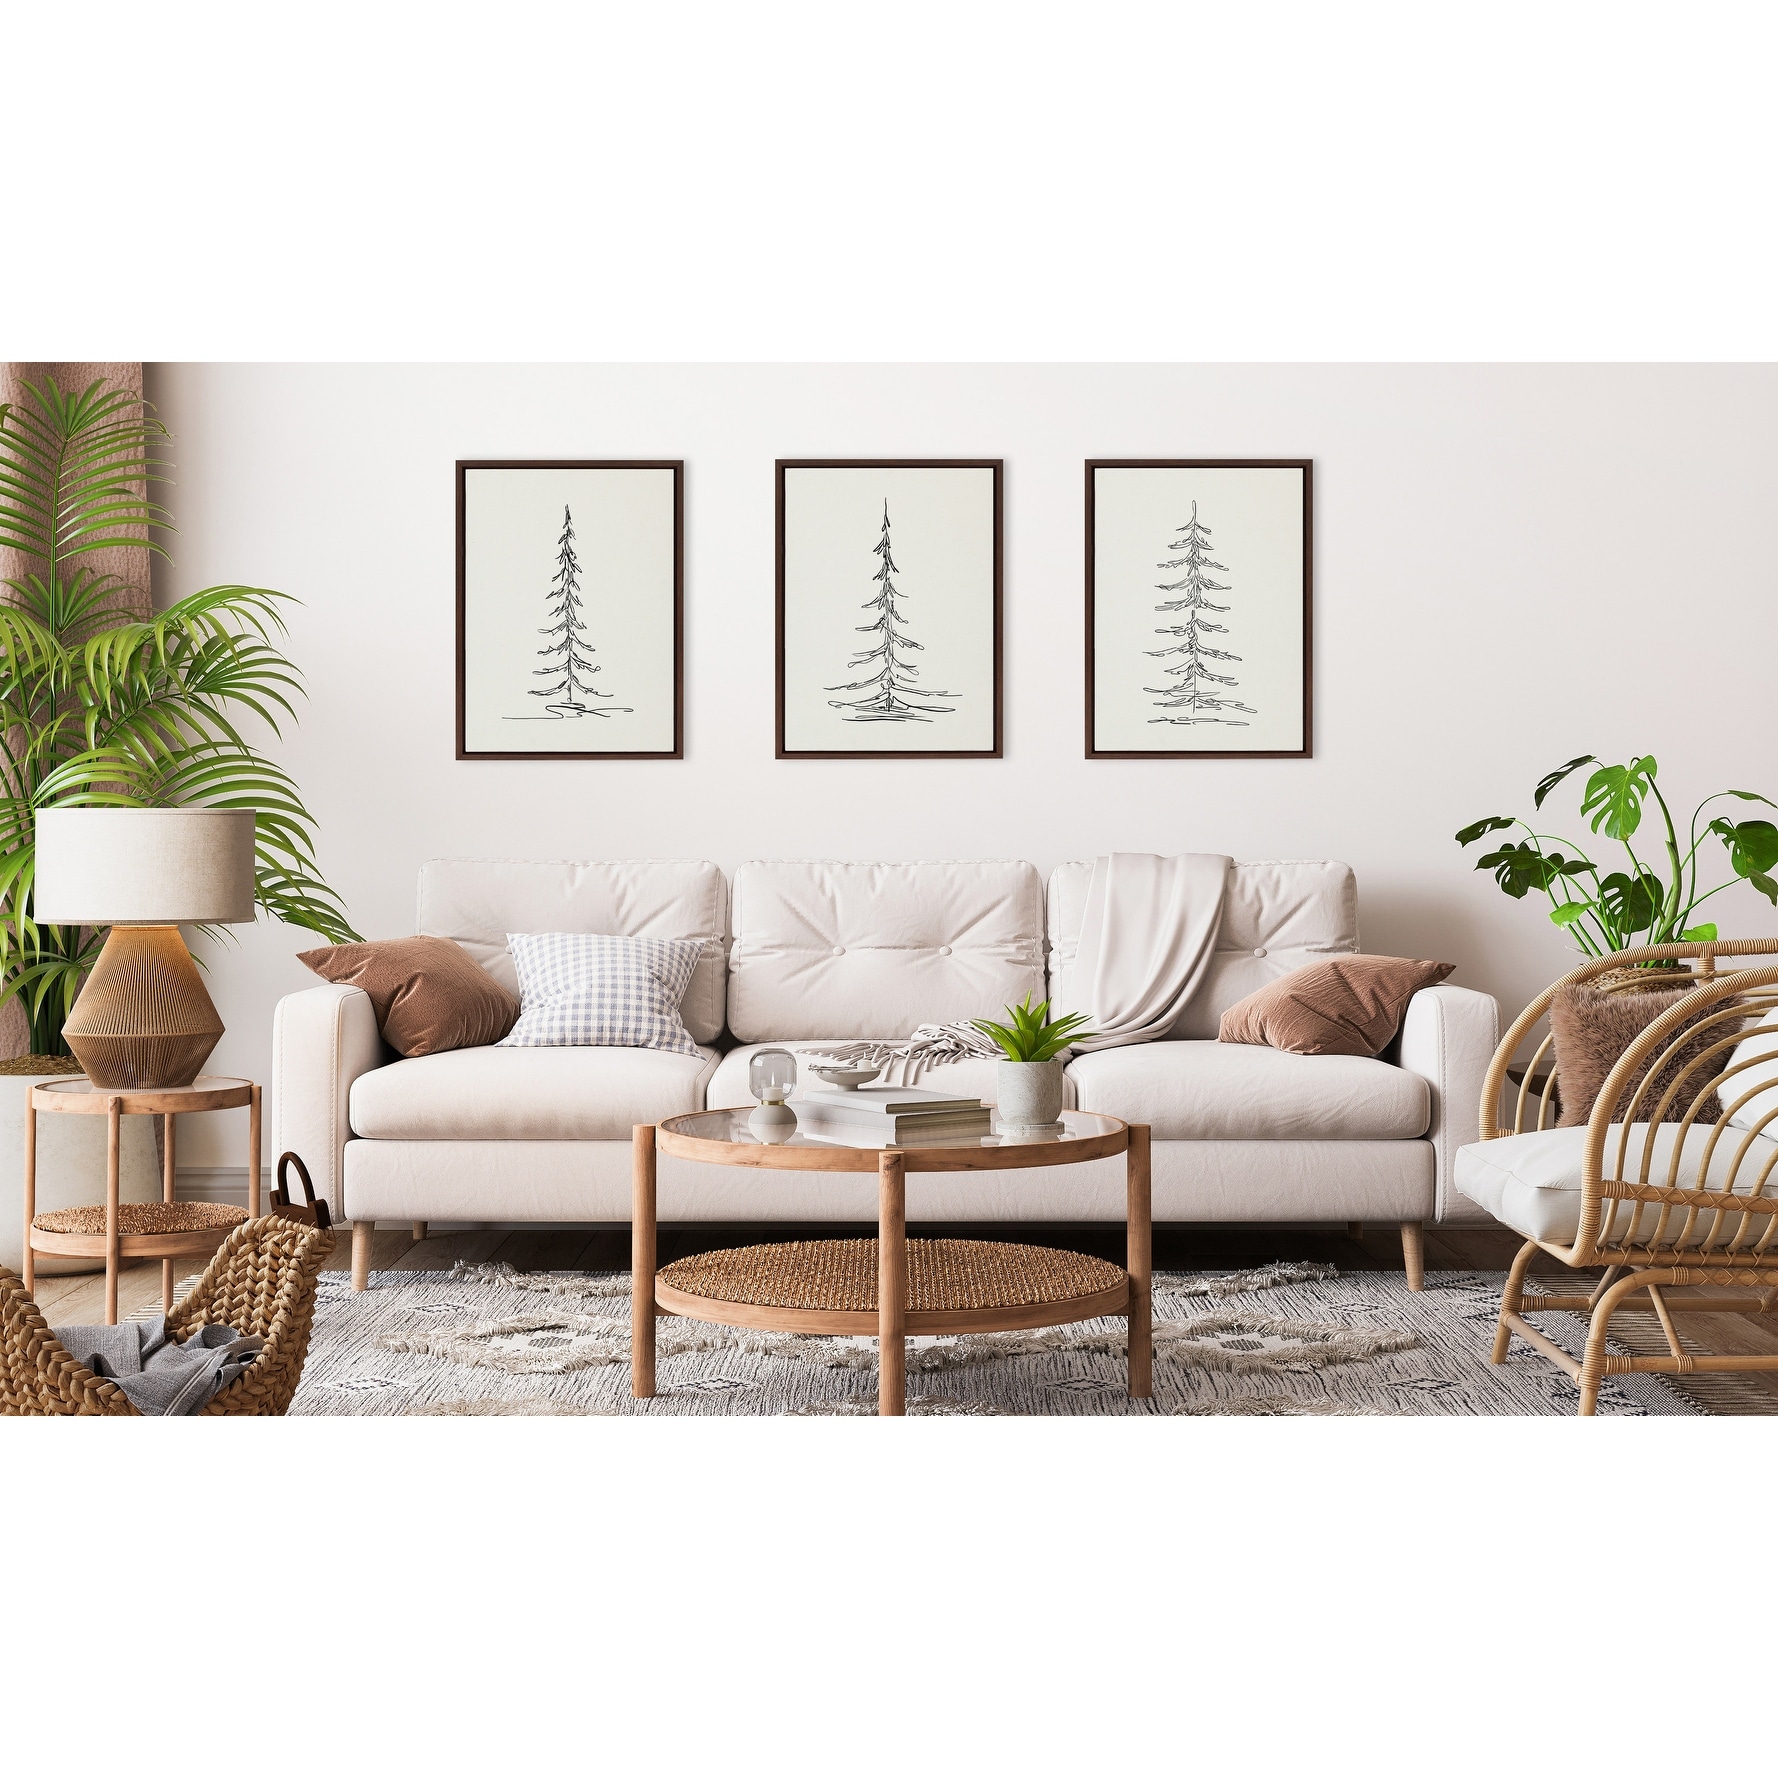 Kate and Laurel Sylvie Trees Frame Canvas by The Creative Bunch Studio  Bed Bath  Beyond 35527123